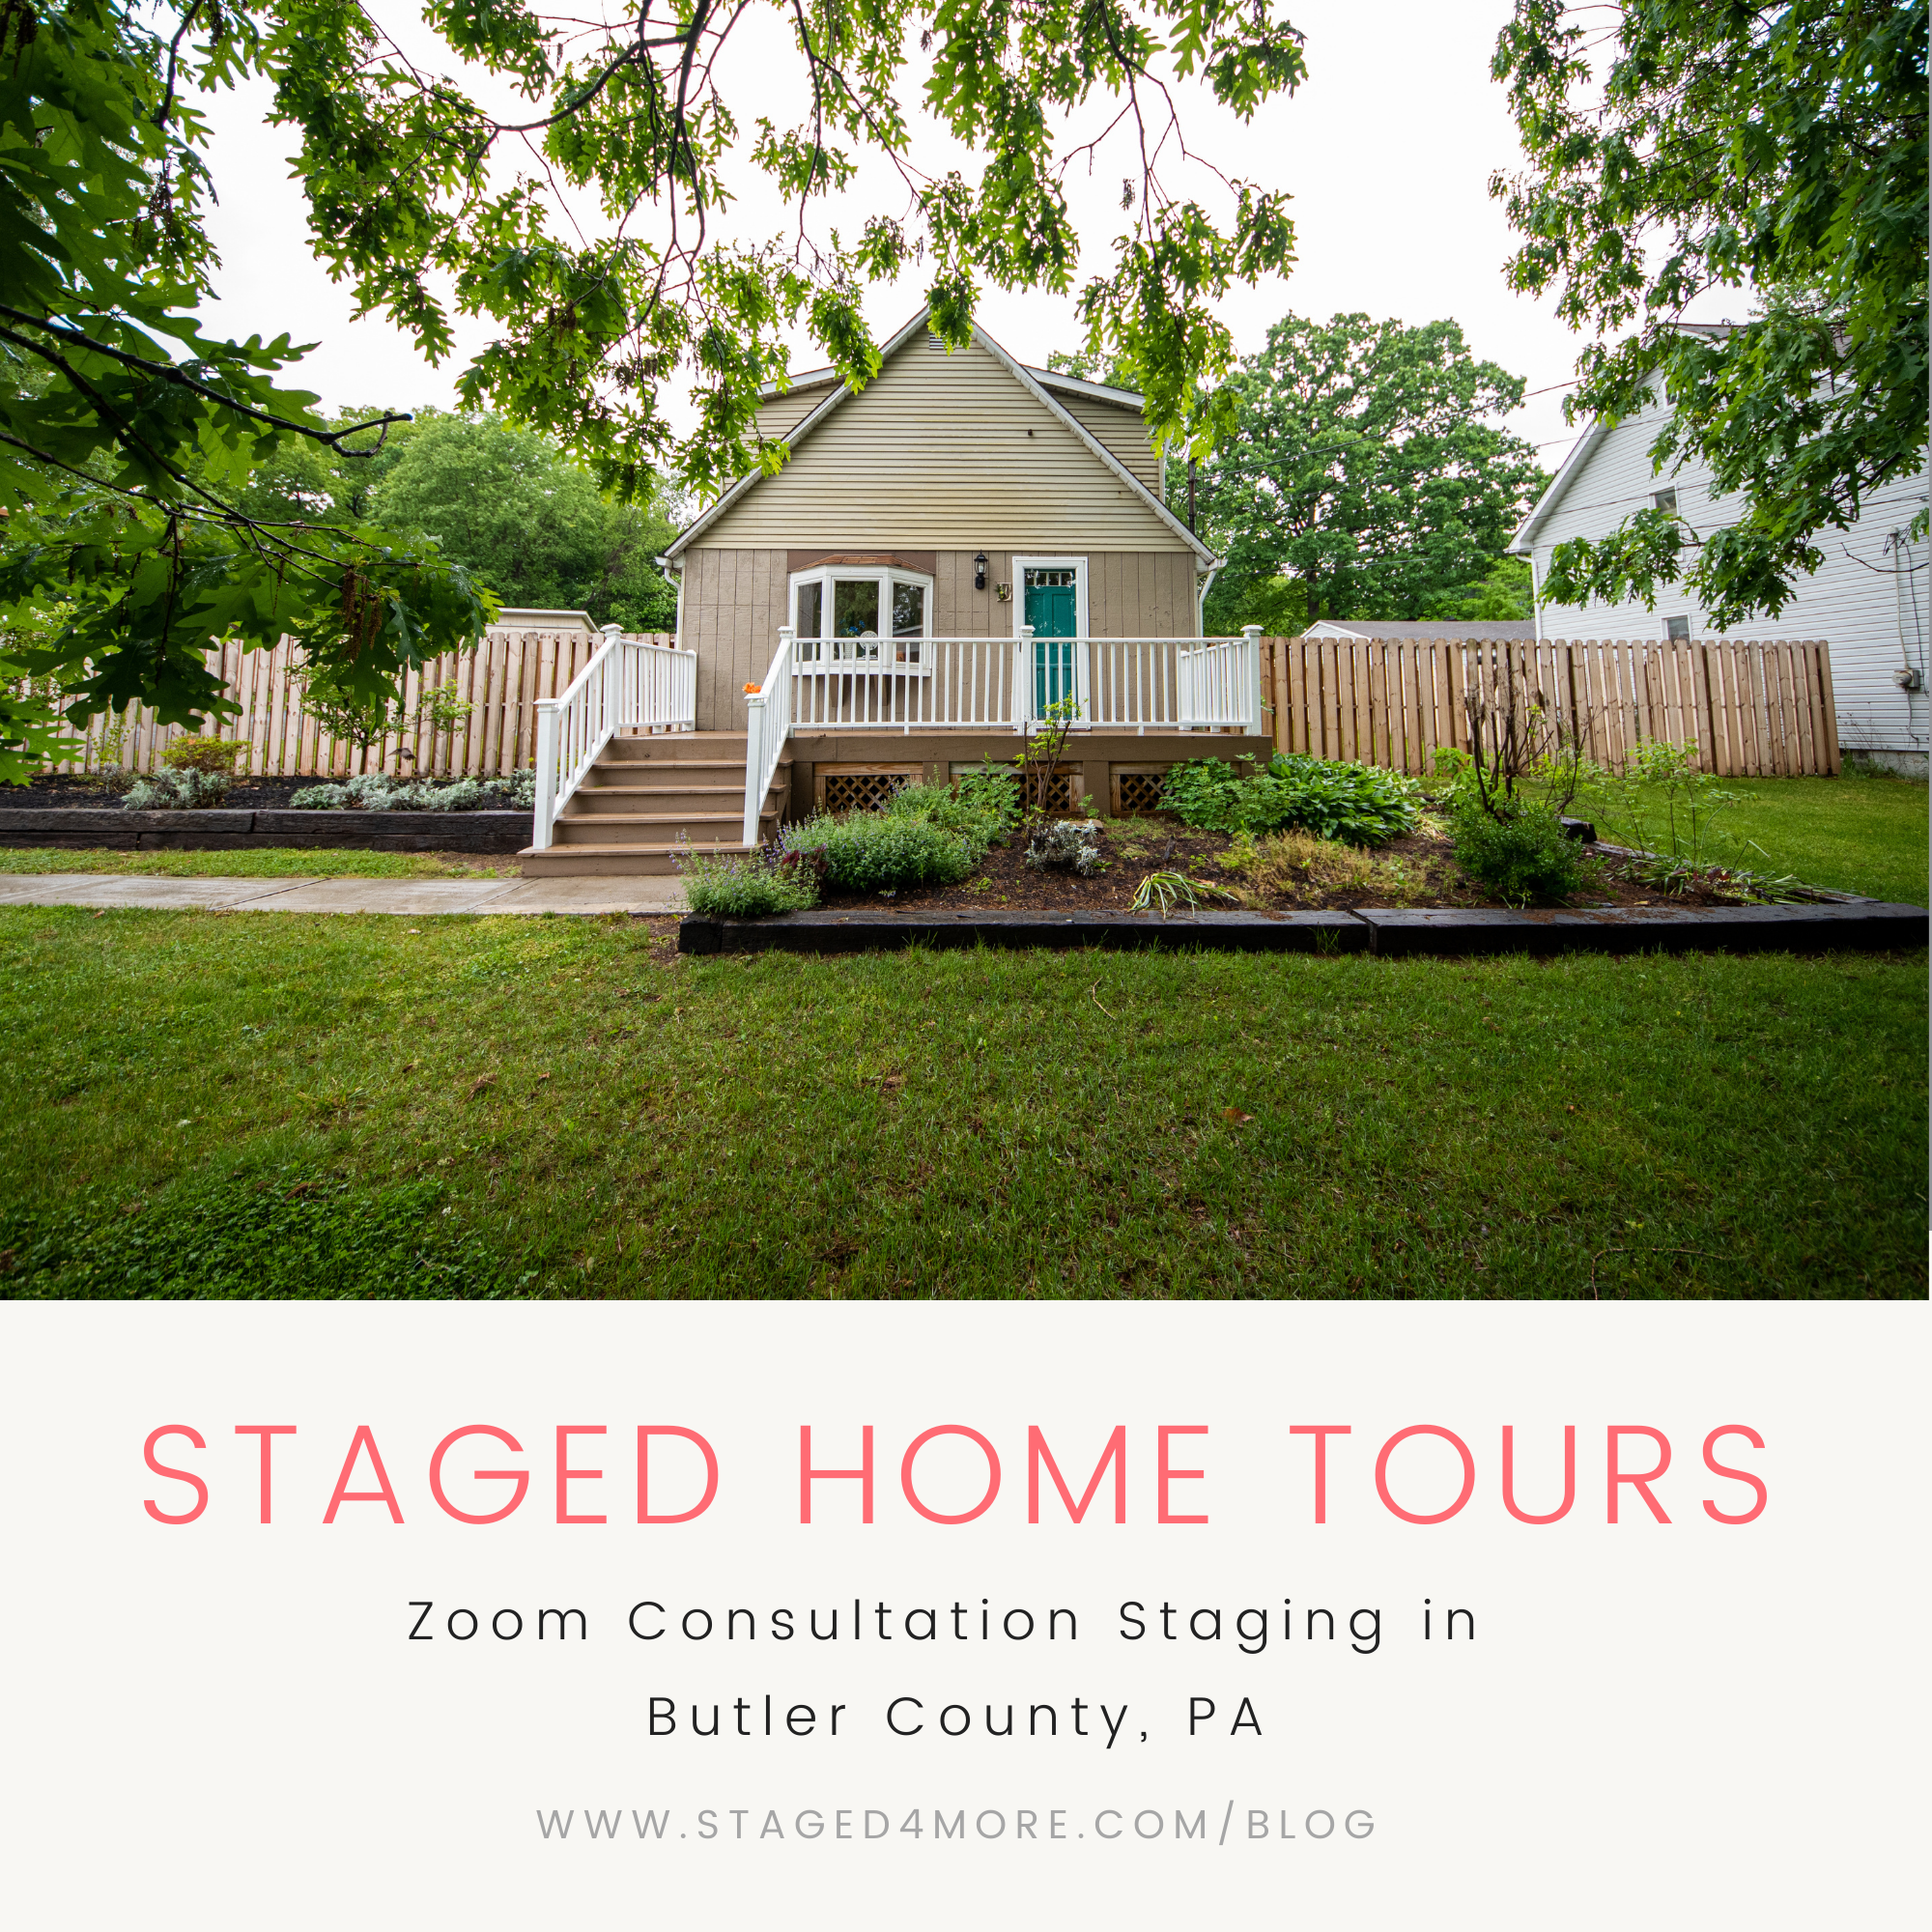 Staged Home Tours: Zoom Consultation Staging in Butler County, PA